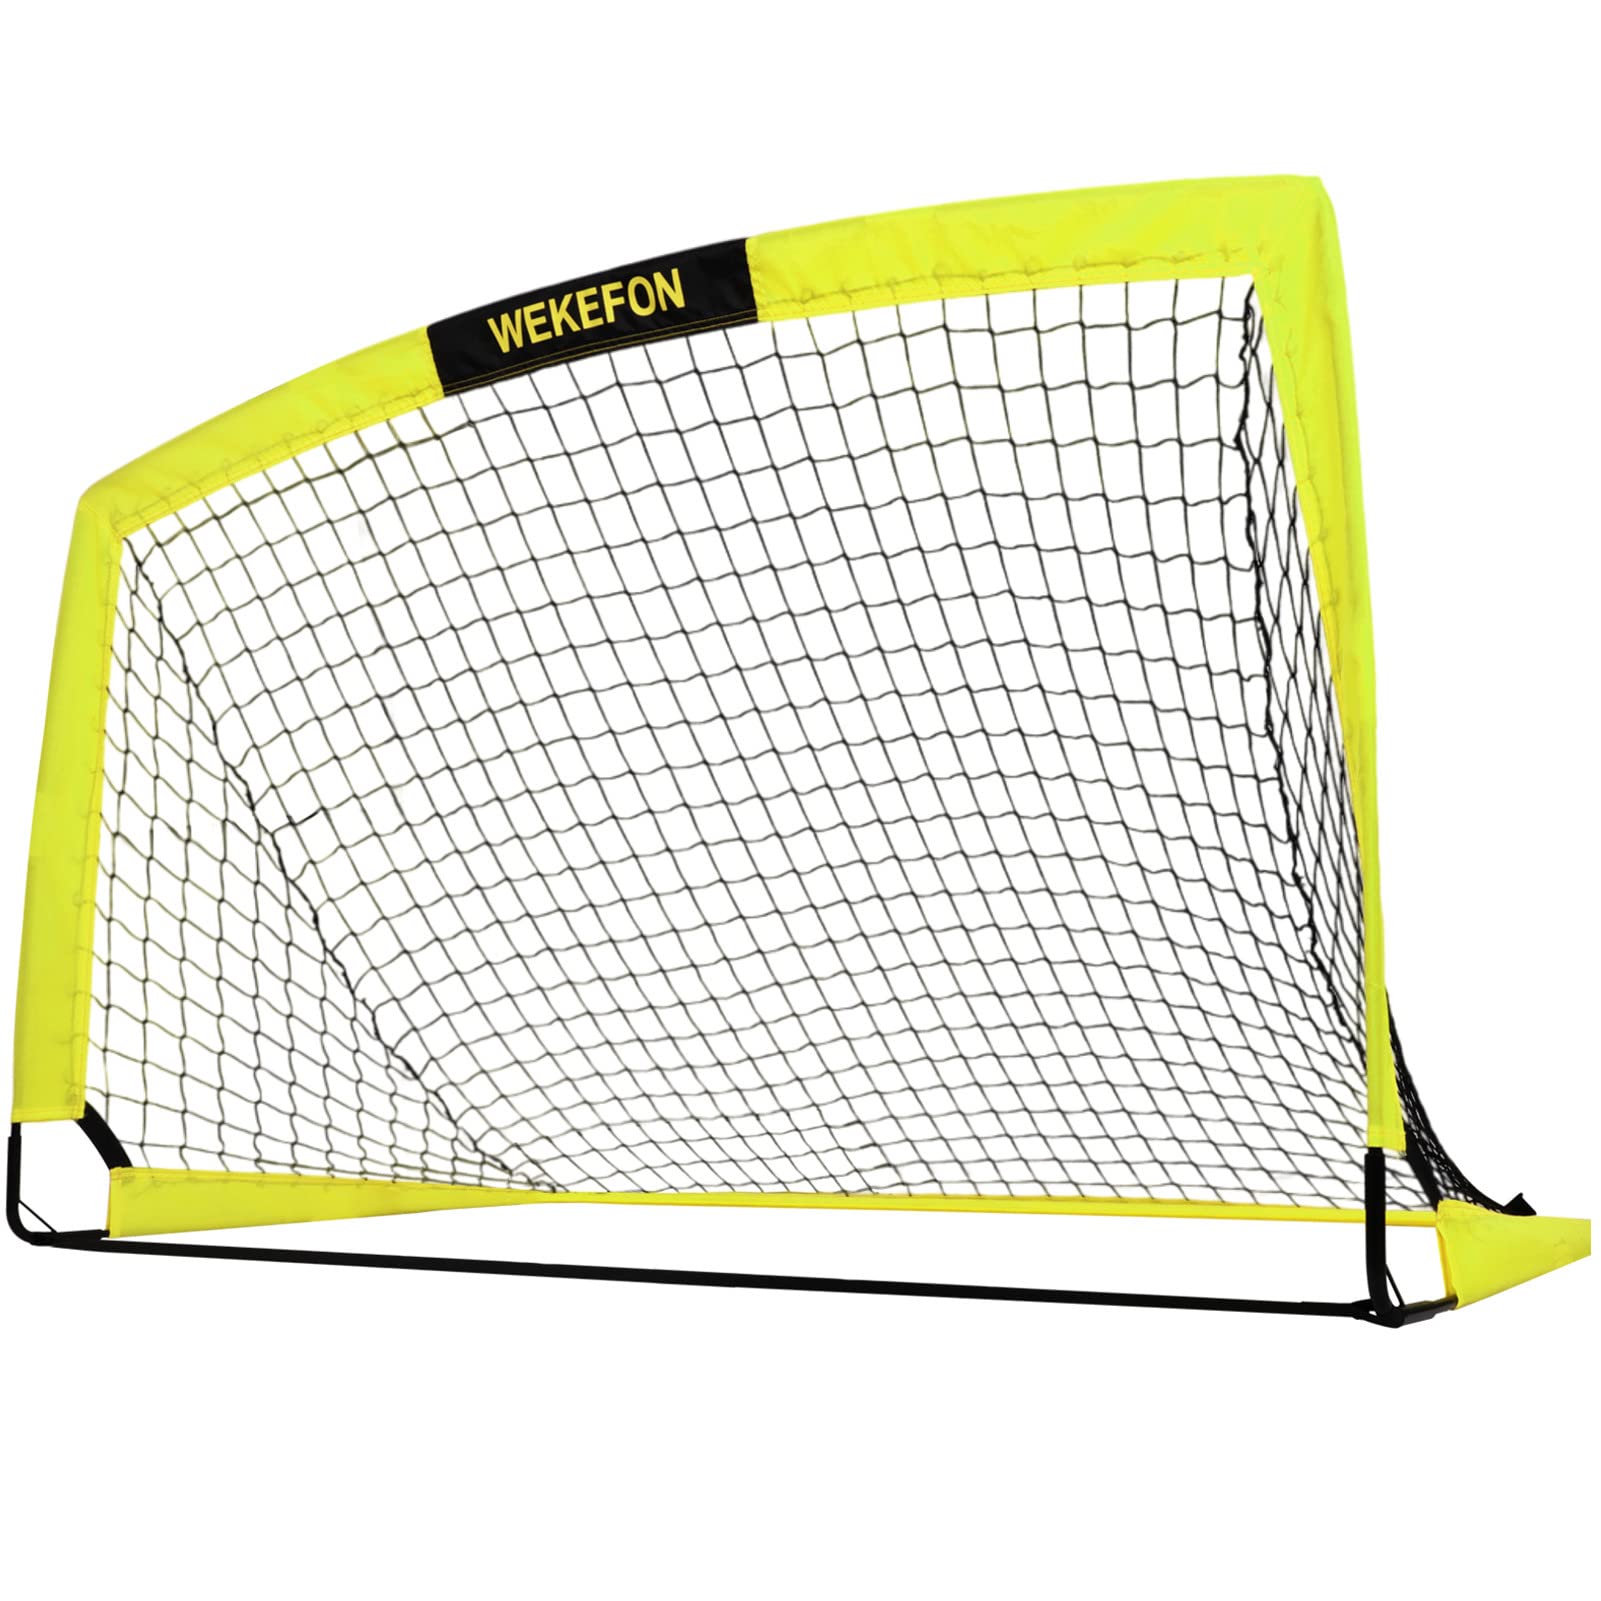 WEKEFON Soccer Goal 5' x 3.1' Portable Soccer Net with Carry Bag for Backyard Games and Training for Kids and Youth Soccer Pract